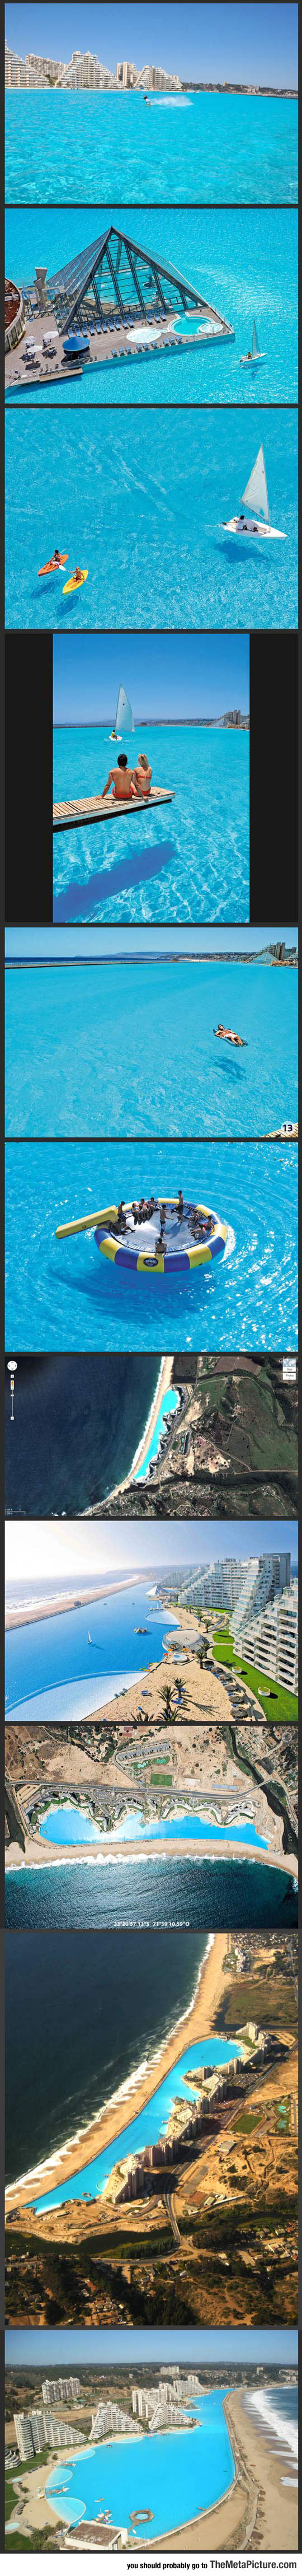 cool-largest-swimming-pool-world-Chile